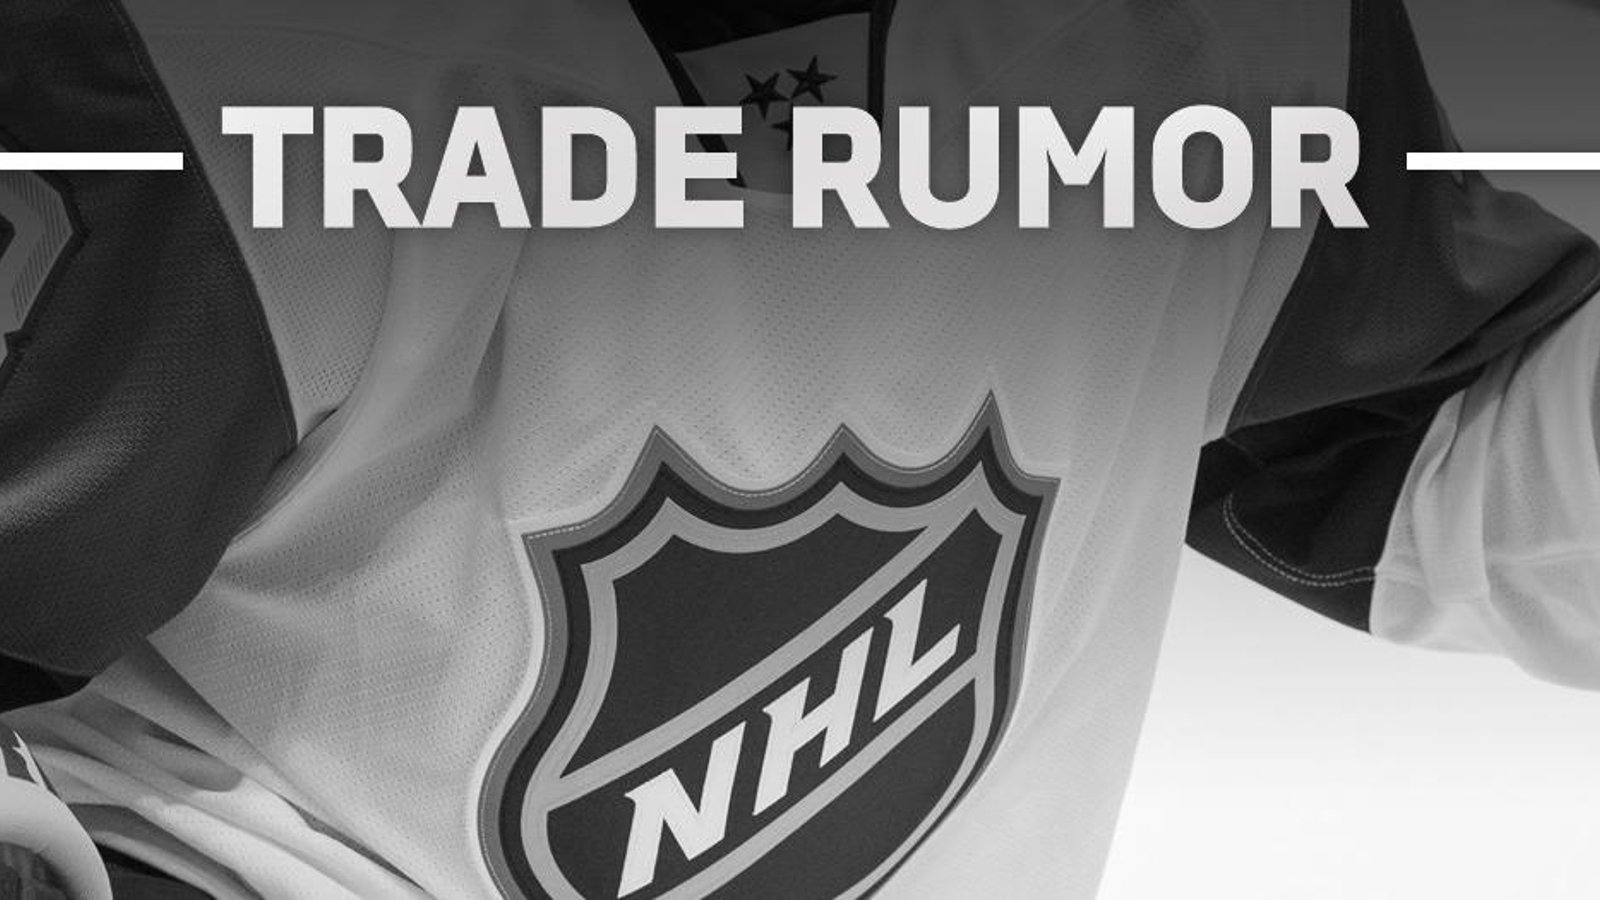 Rumor: Team willing to trade highly skilled defenseman but the price is high.